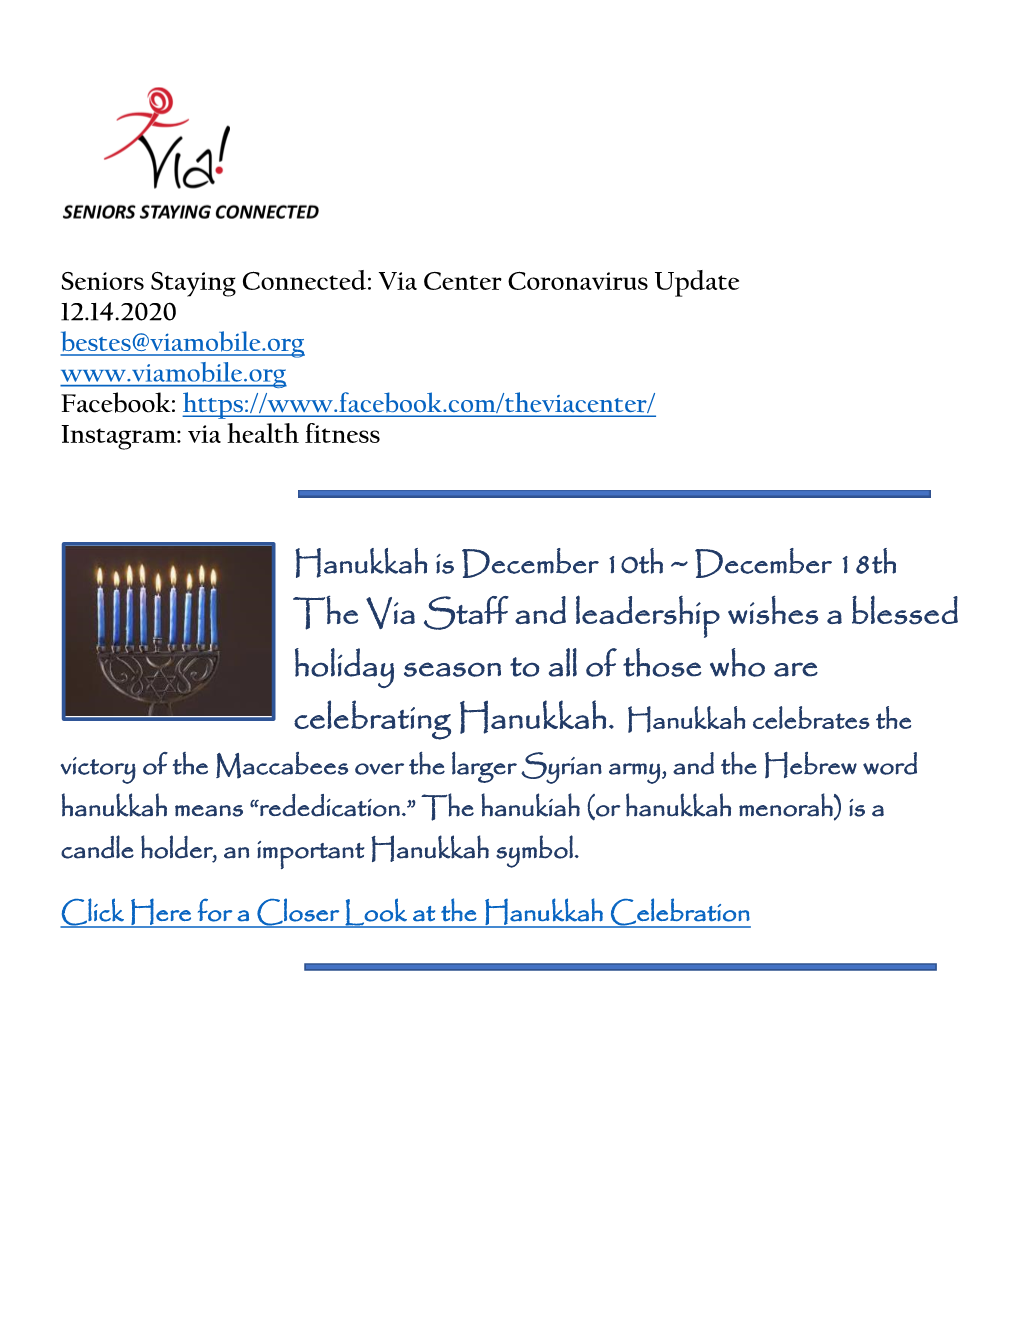 The Via Staff and Leadership Wishes a Blessed Holiday Season to All of Those Who Are Celebrating Hanukkah